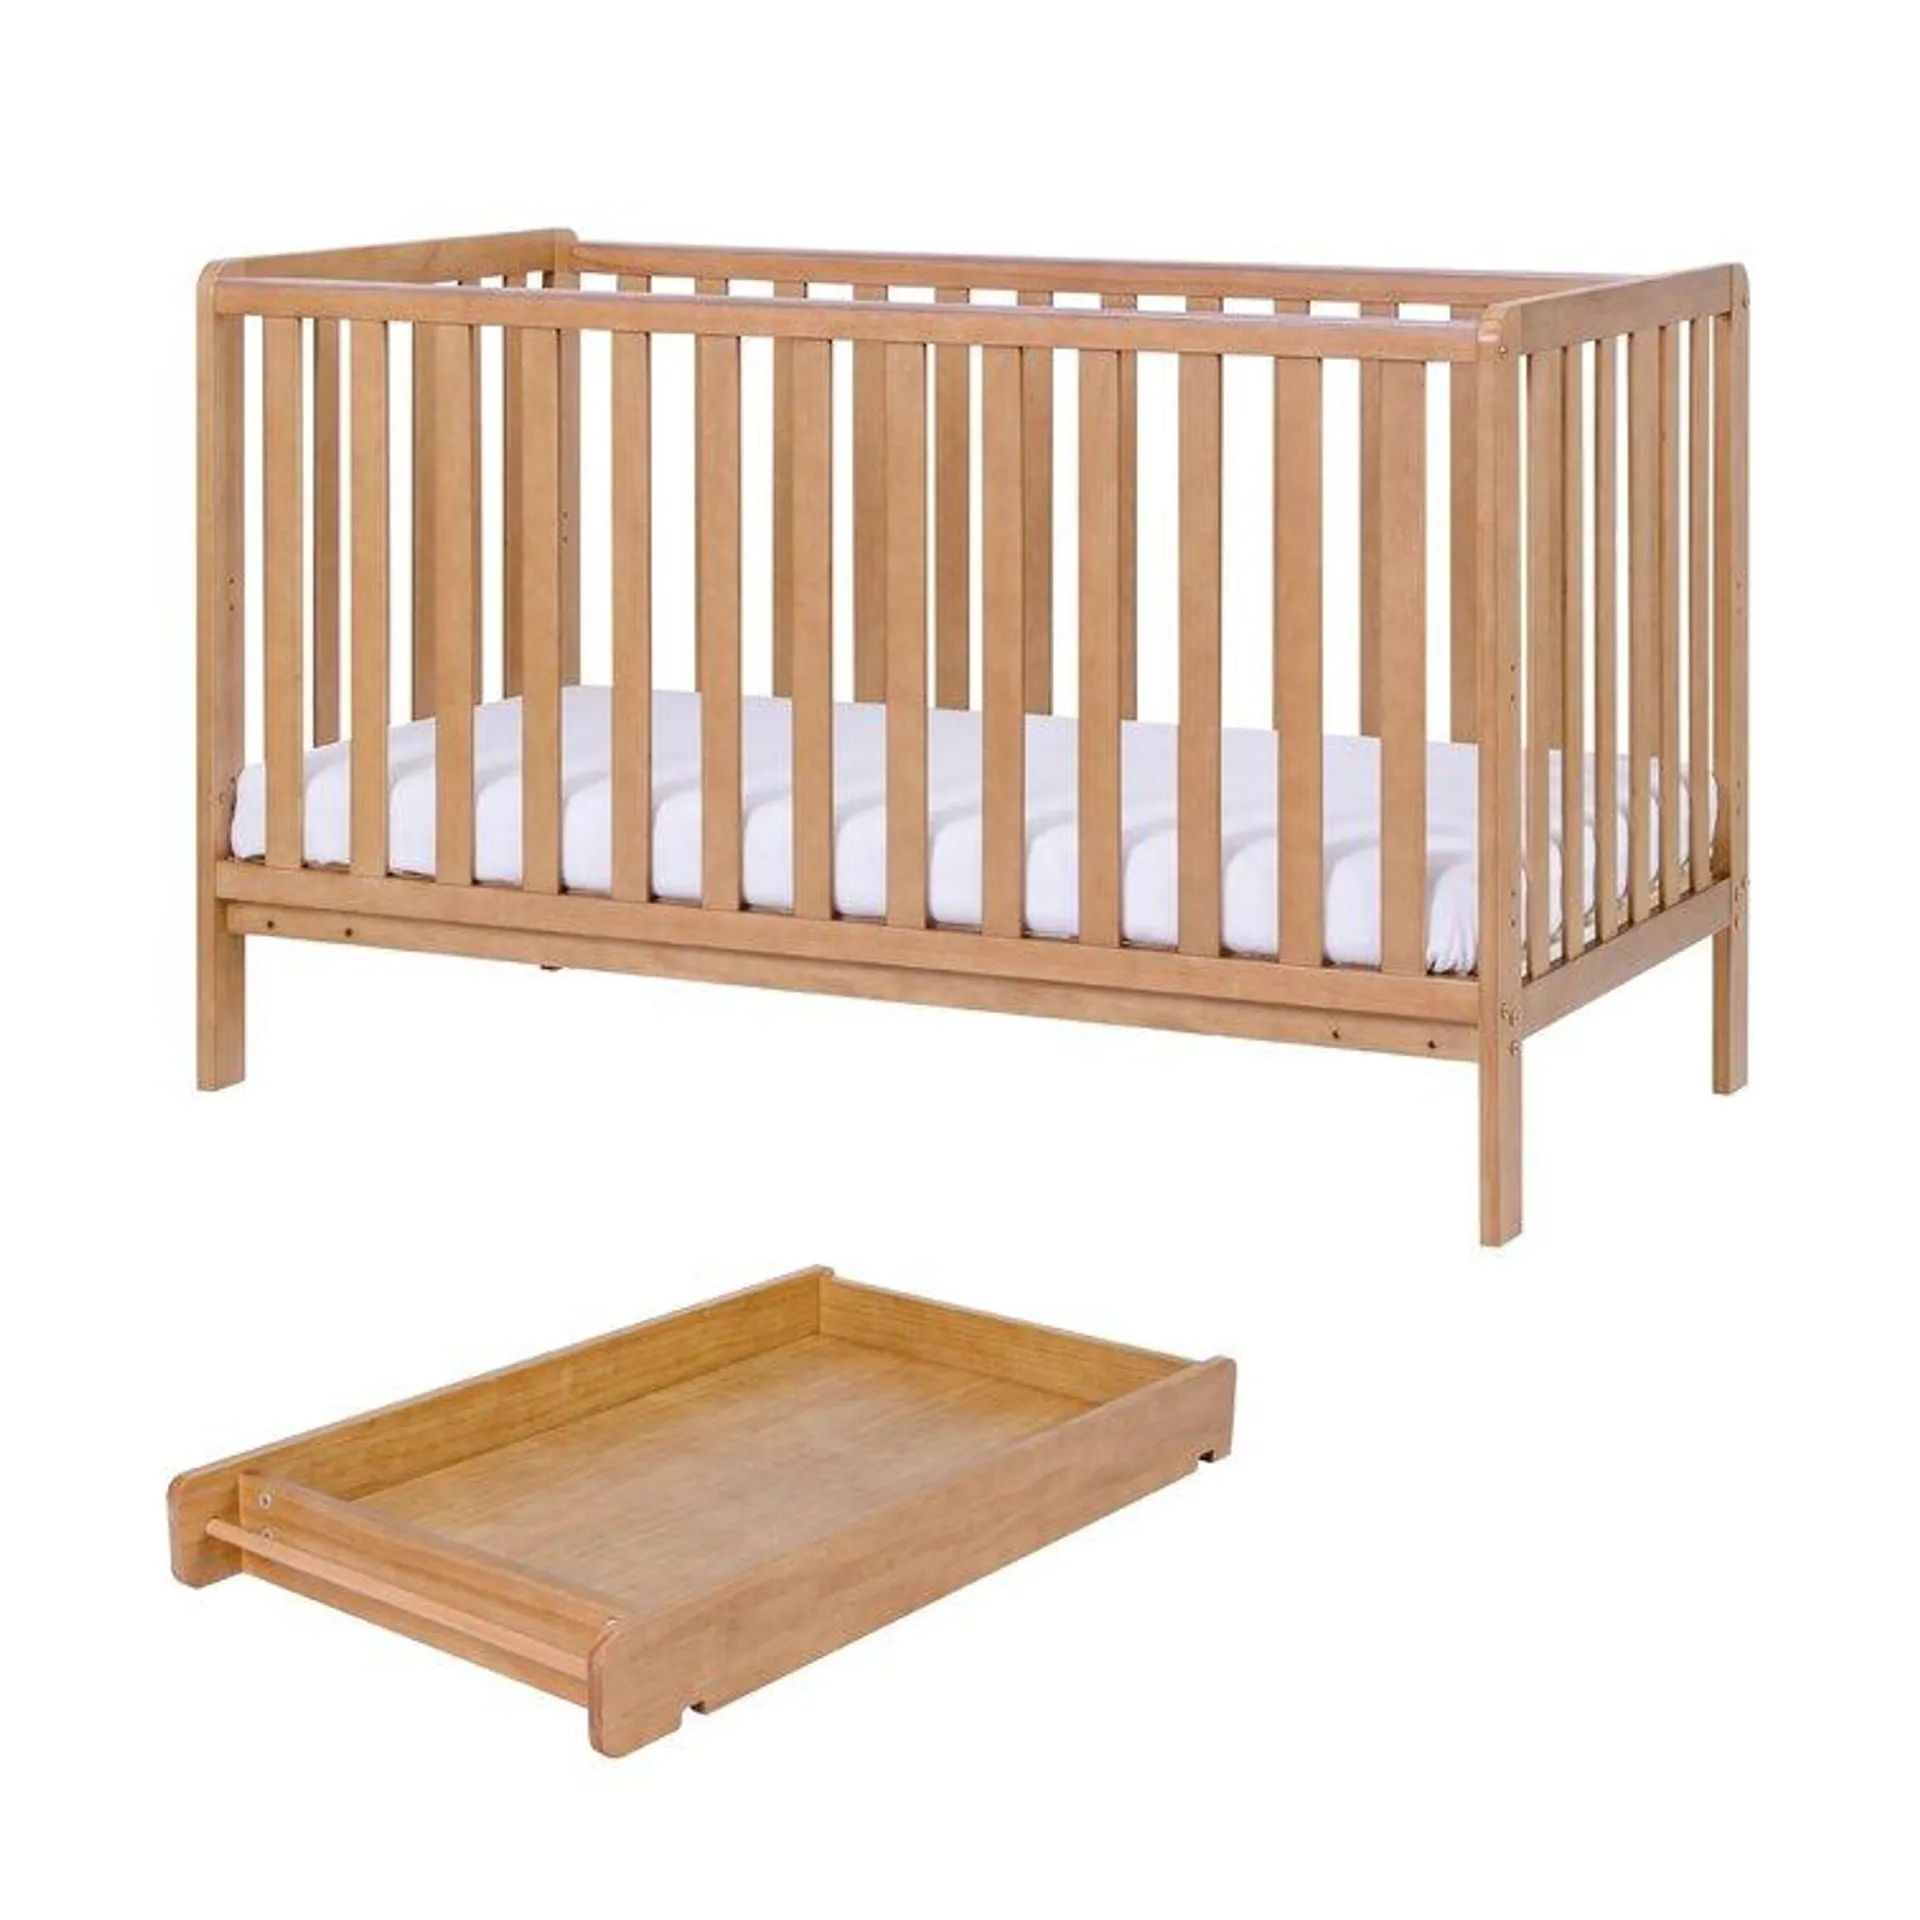 Malmo Cot Bed with Mattress